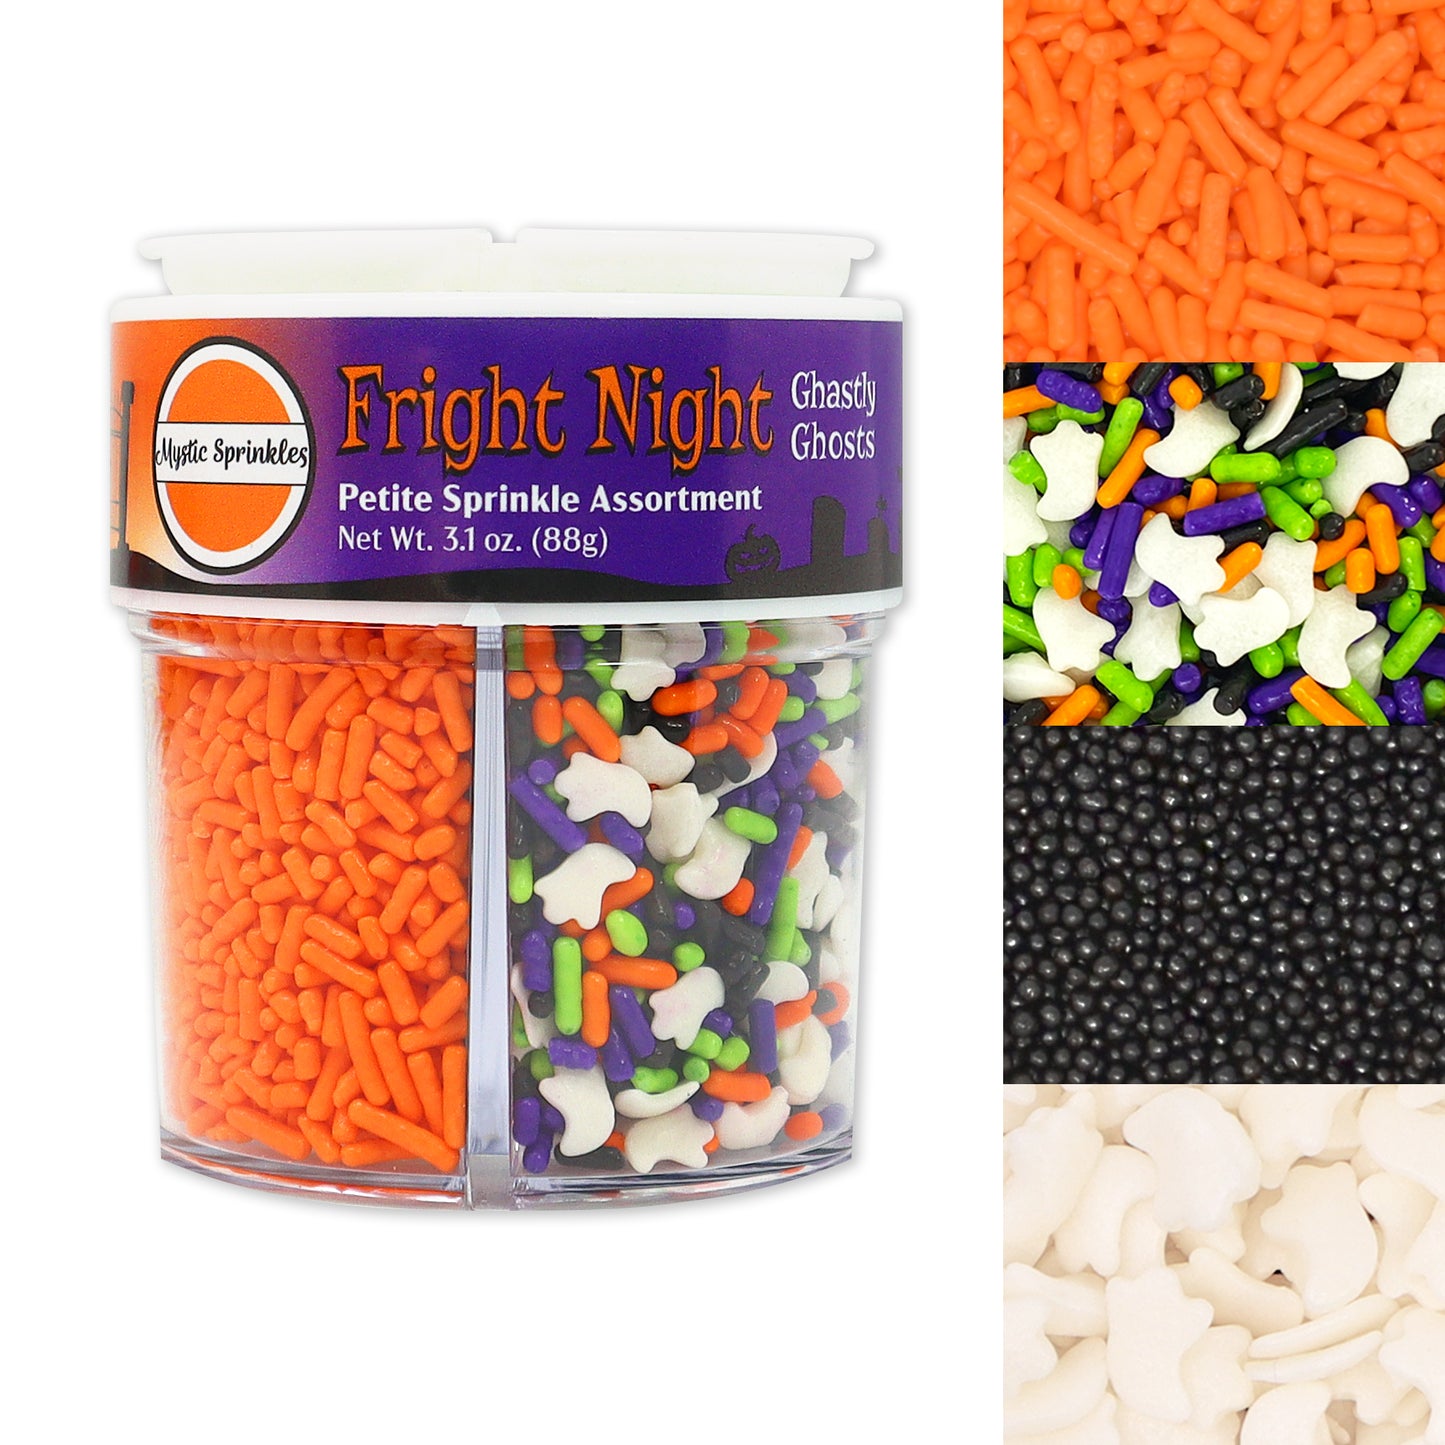 Fright Night Ghastly Ghosts Petite Sprinkle Assortment 3.1oz